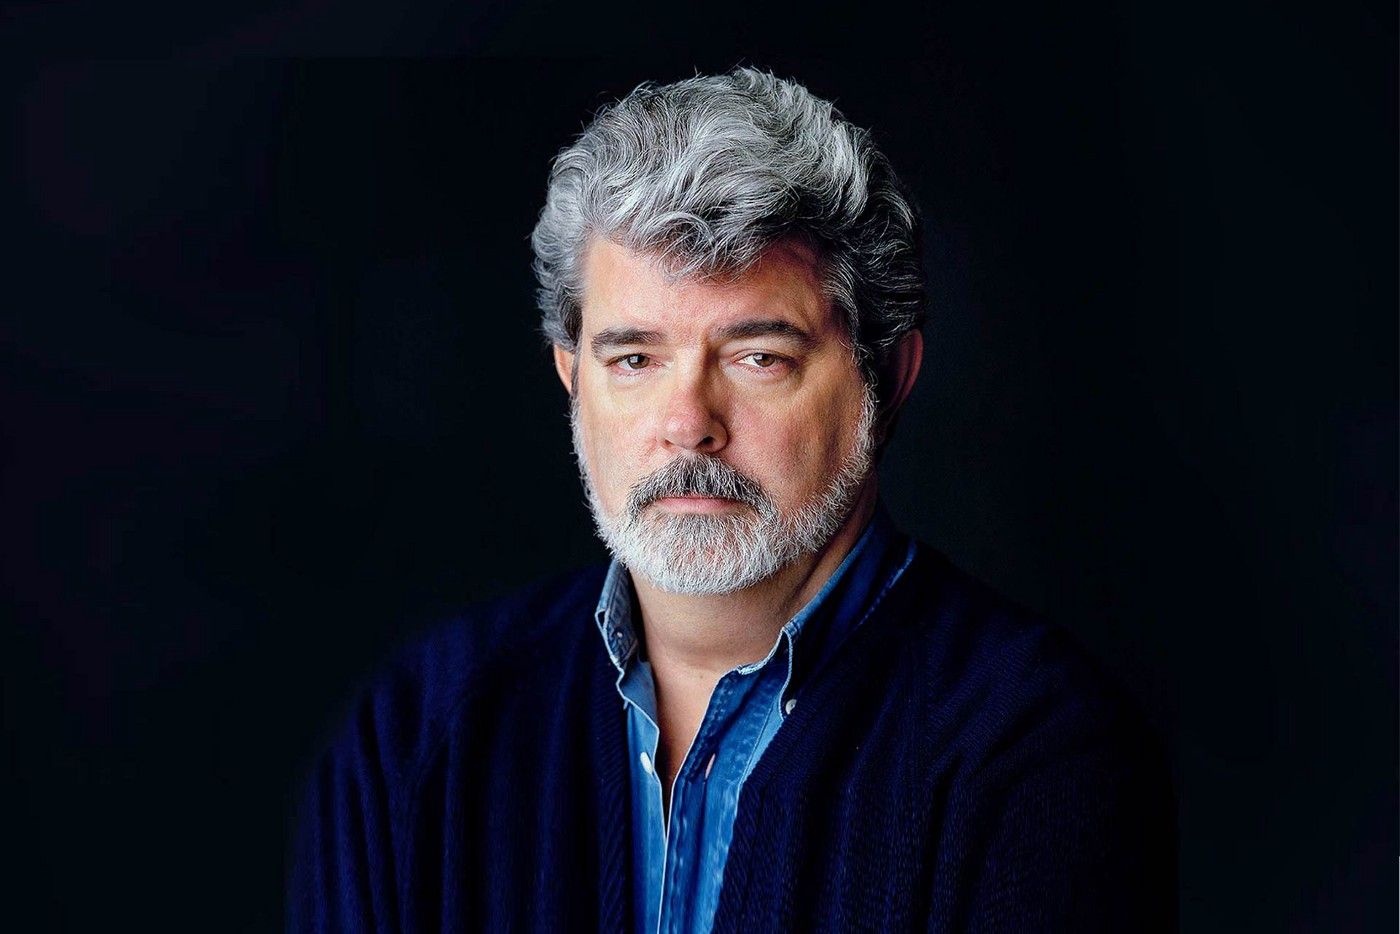 George Lucas. Image from CoRD Magazine.